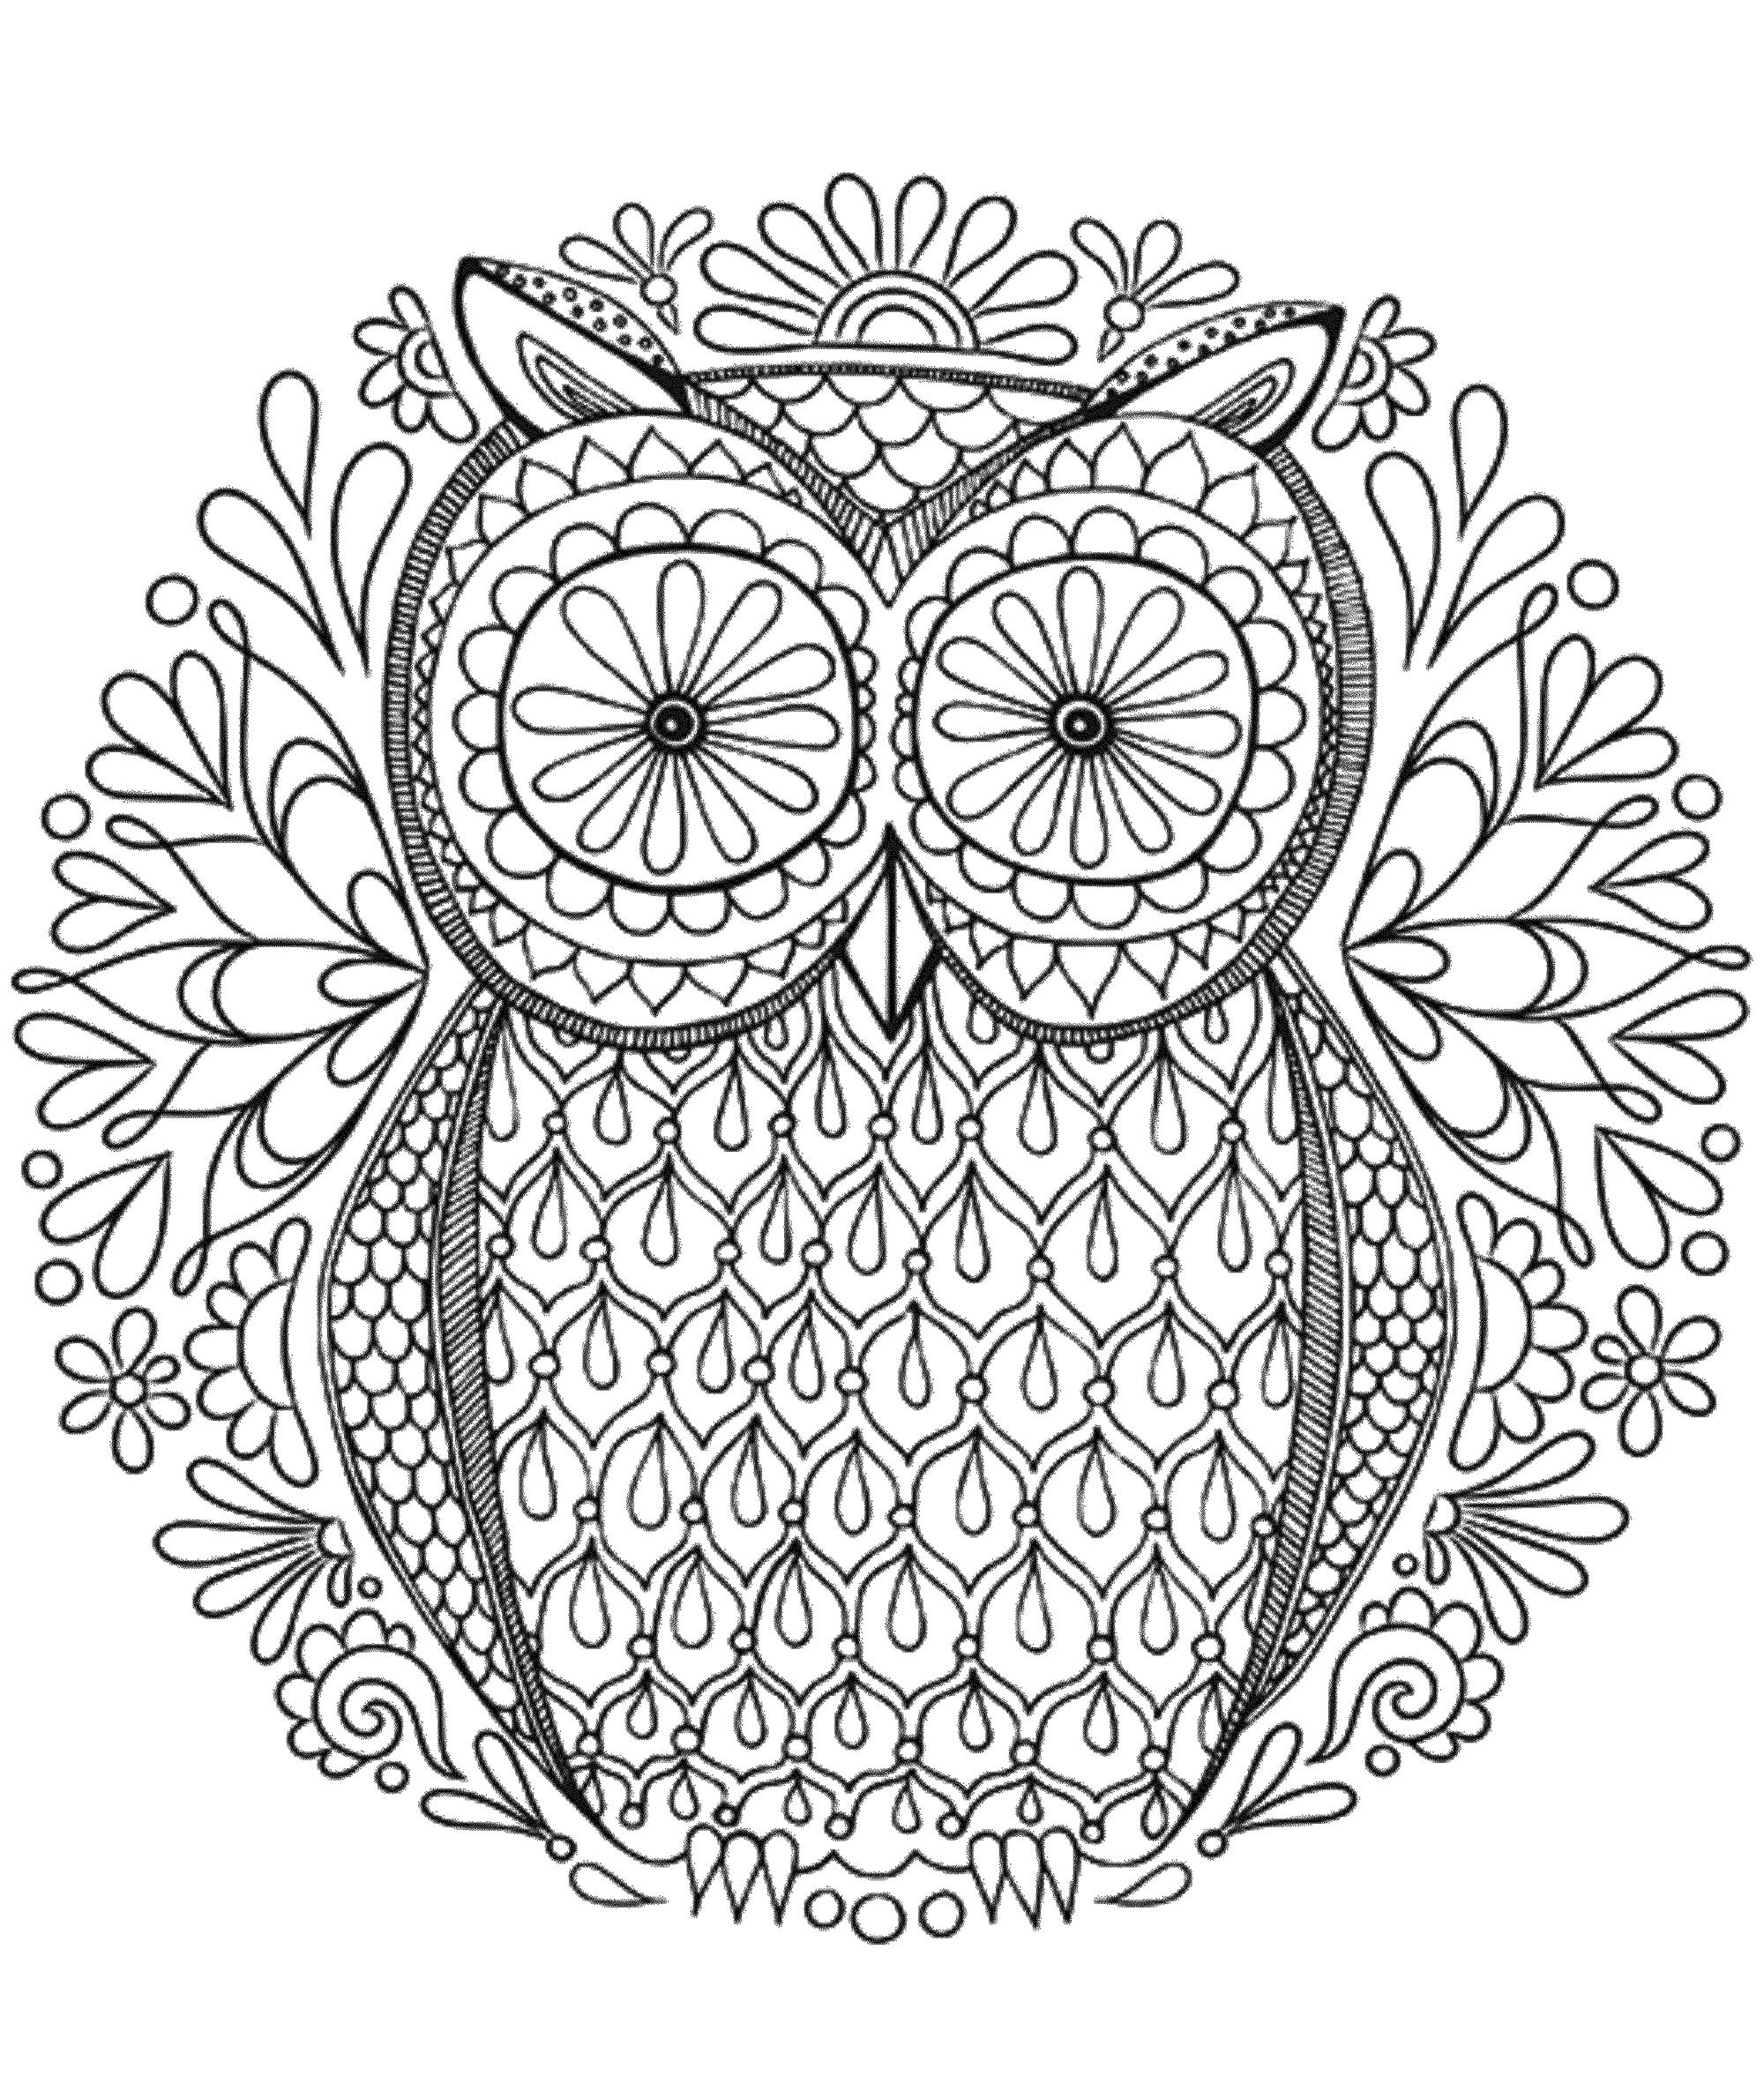 Mandala to download in pdf 6 - M&alas Adult Coloring Pages